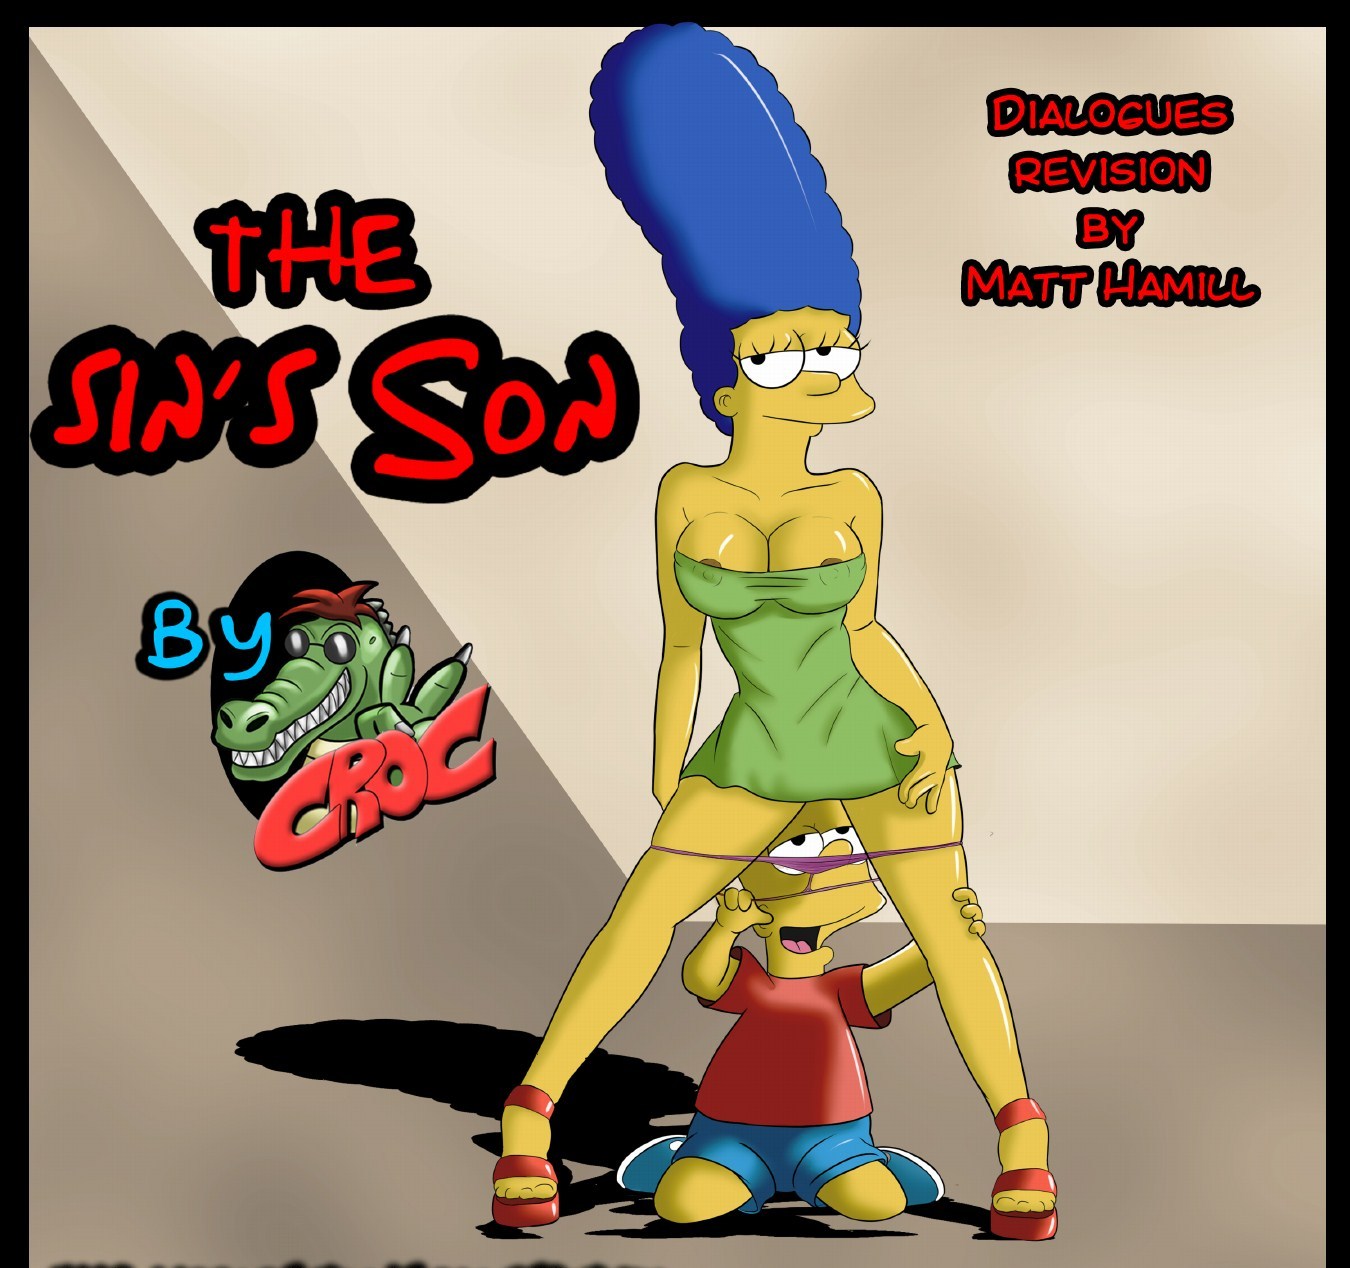 Simpsons-The Sin’s Son image 01